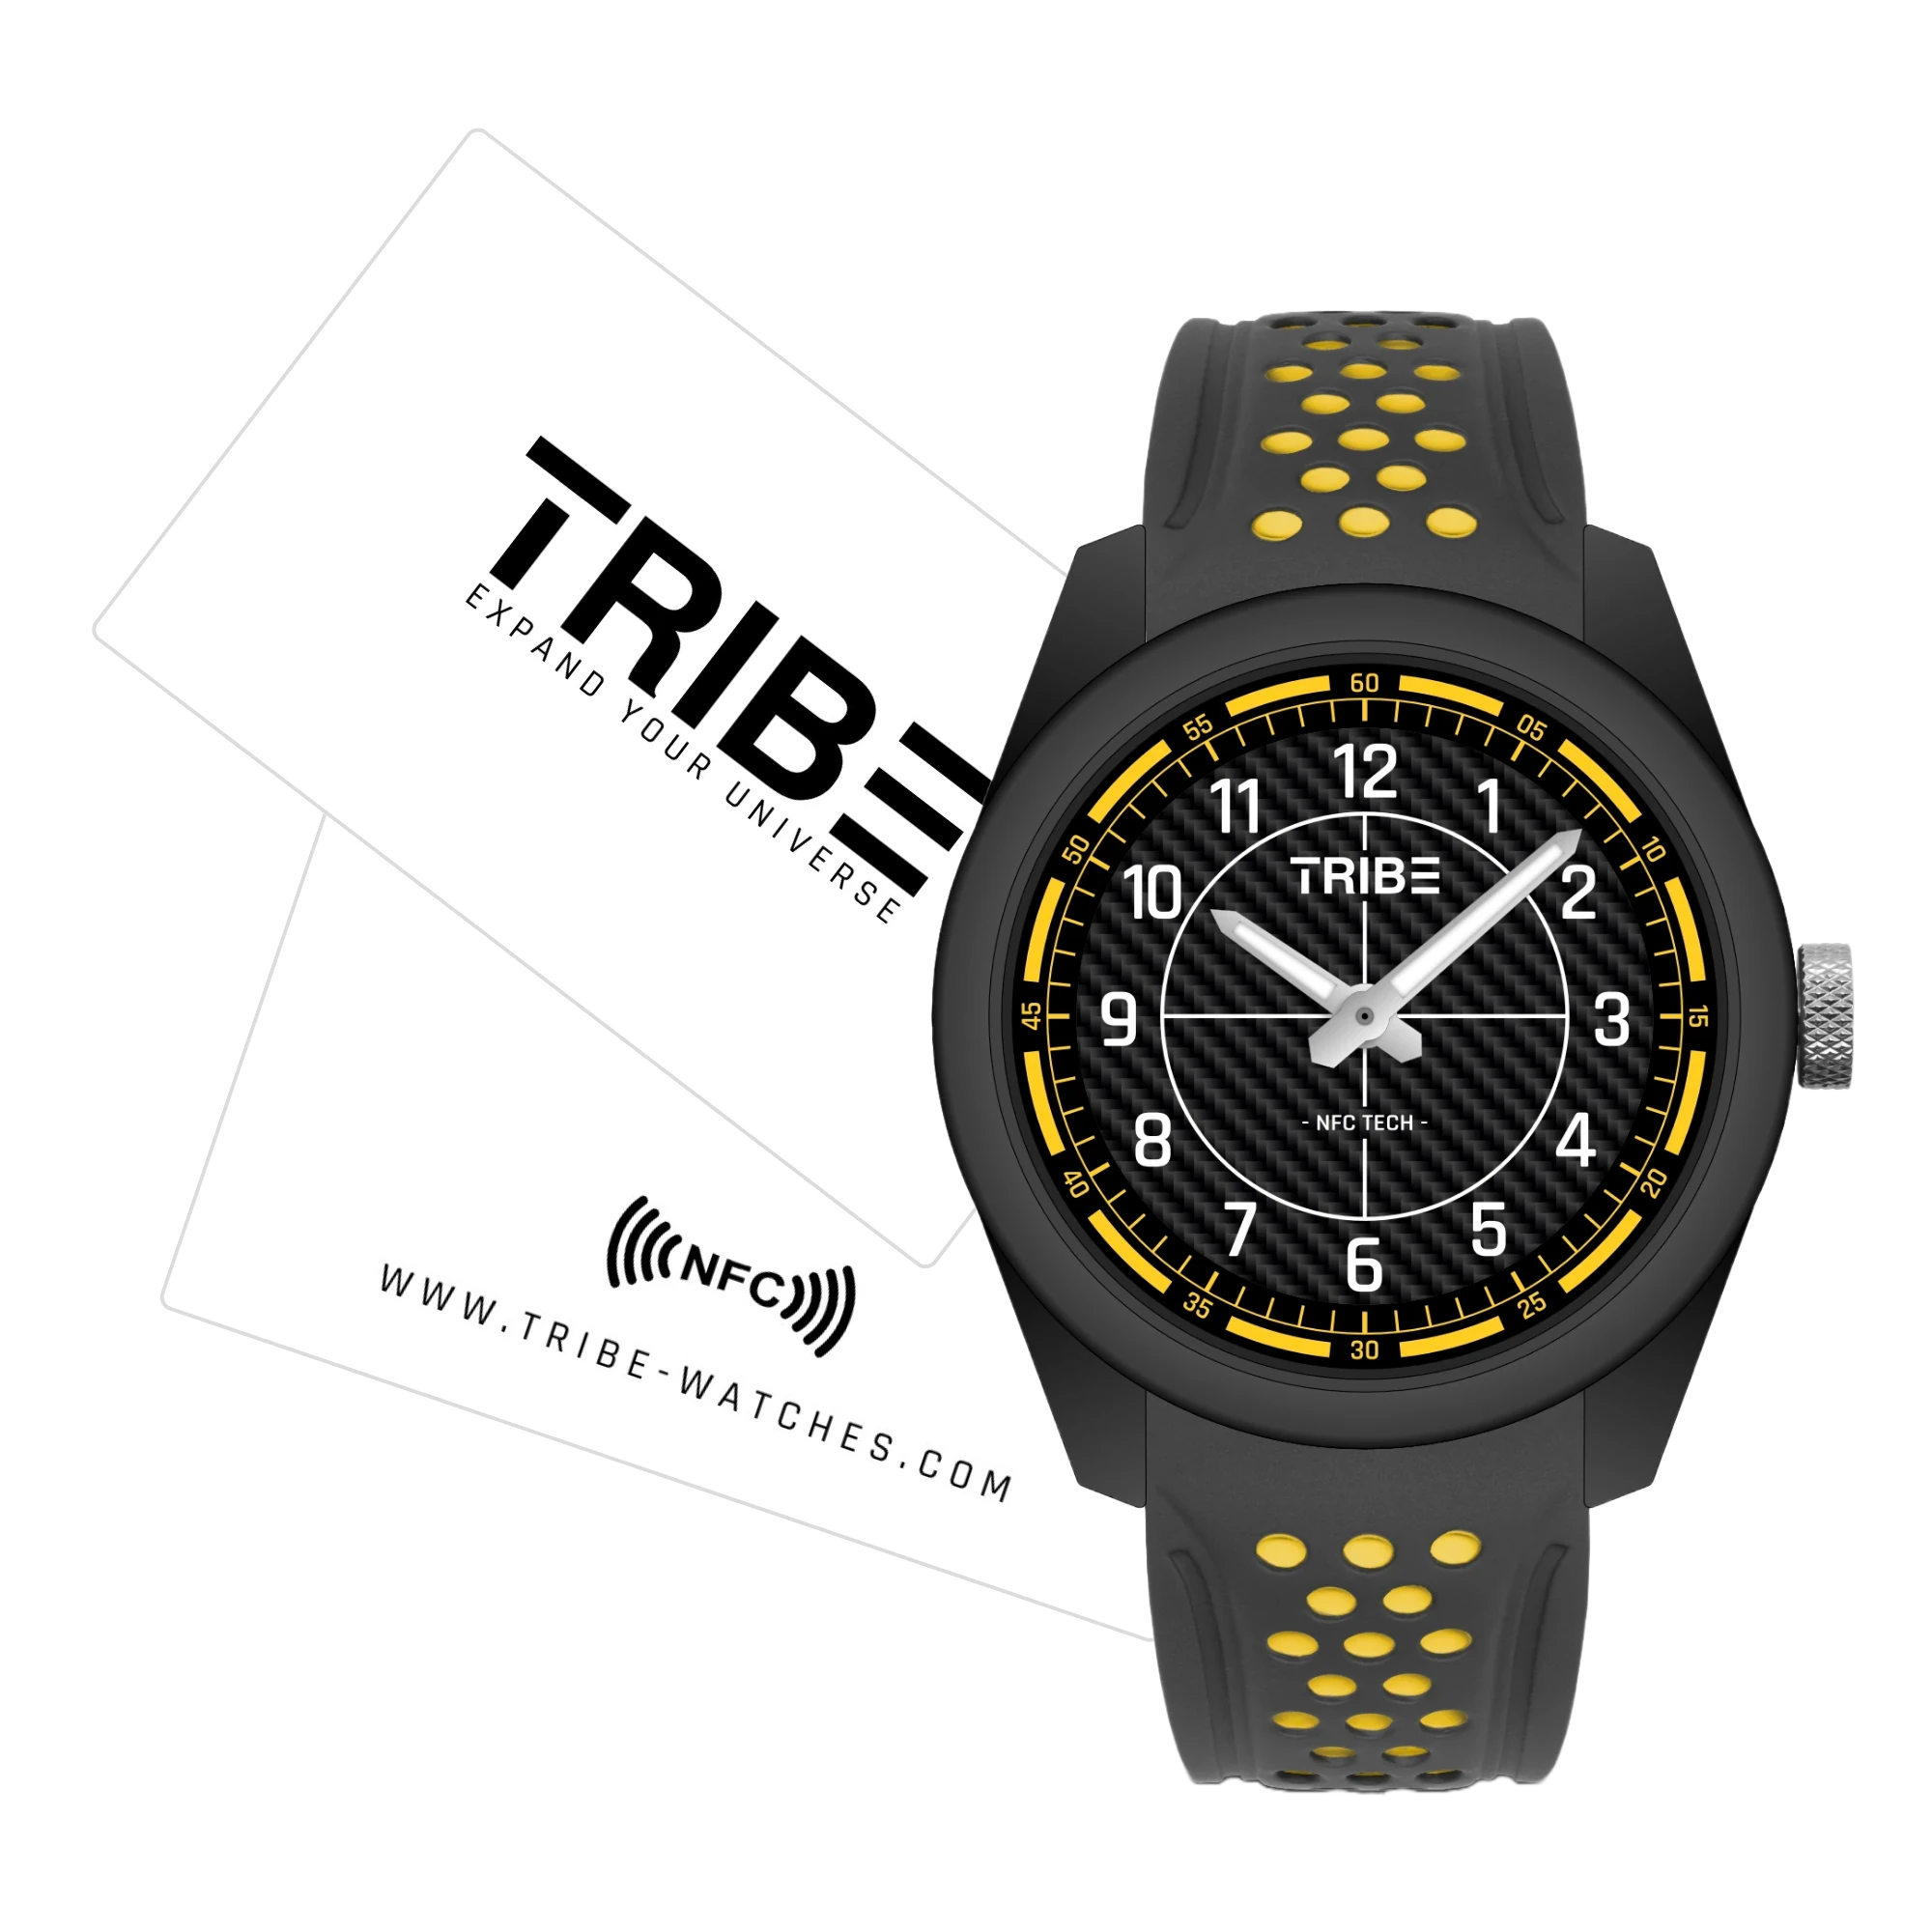 T1B-YELLOW watch + connected business card